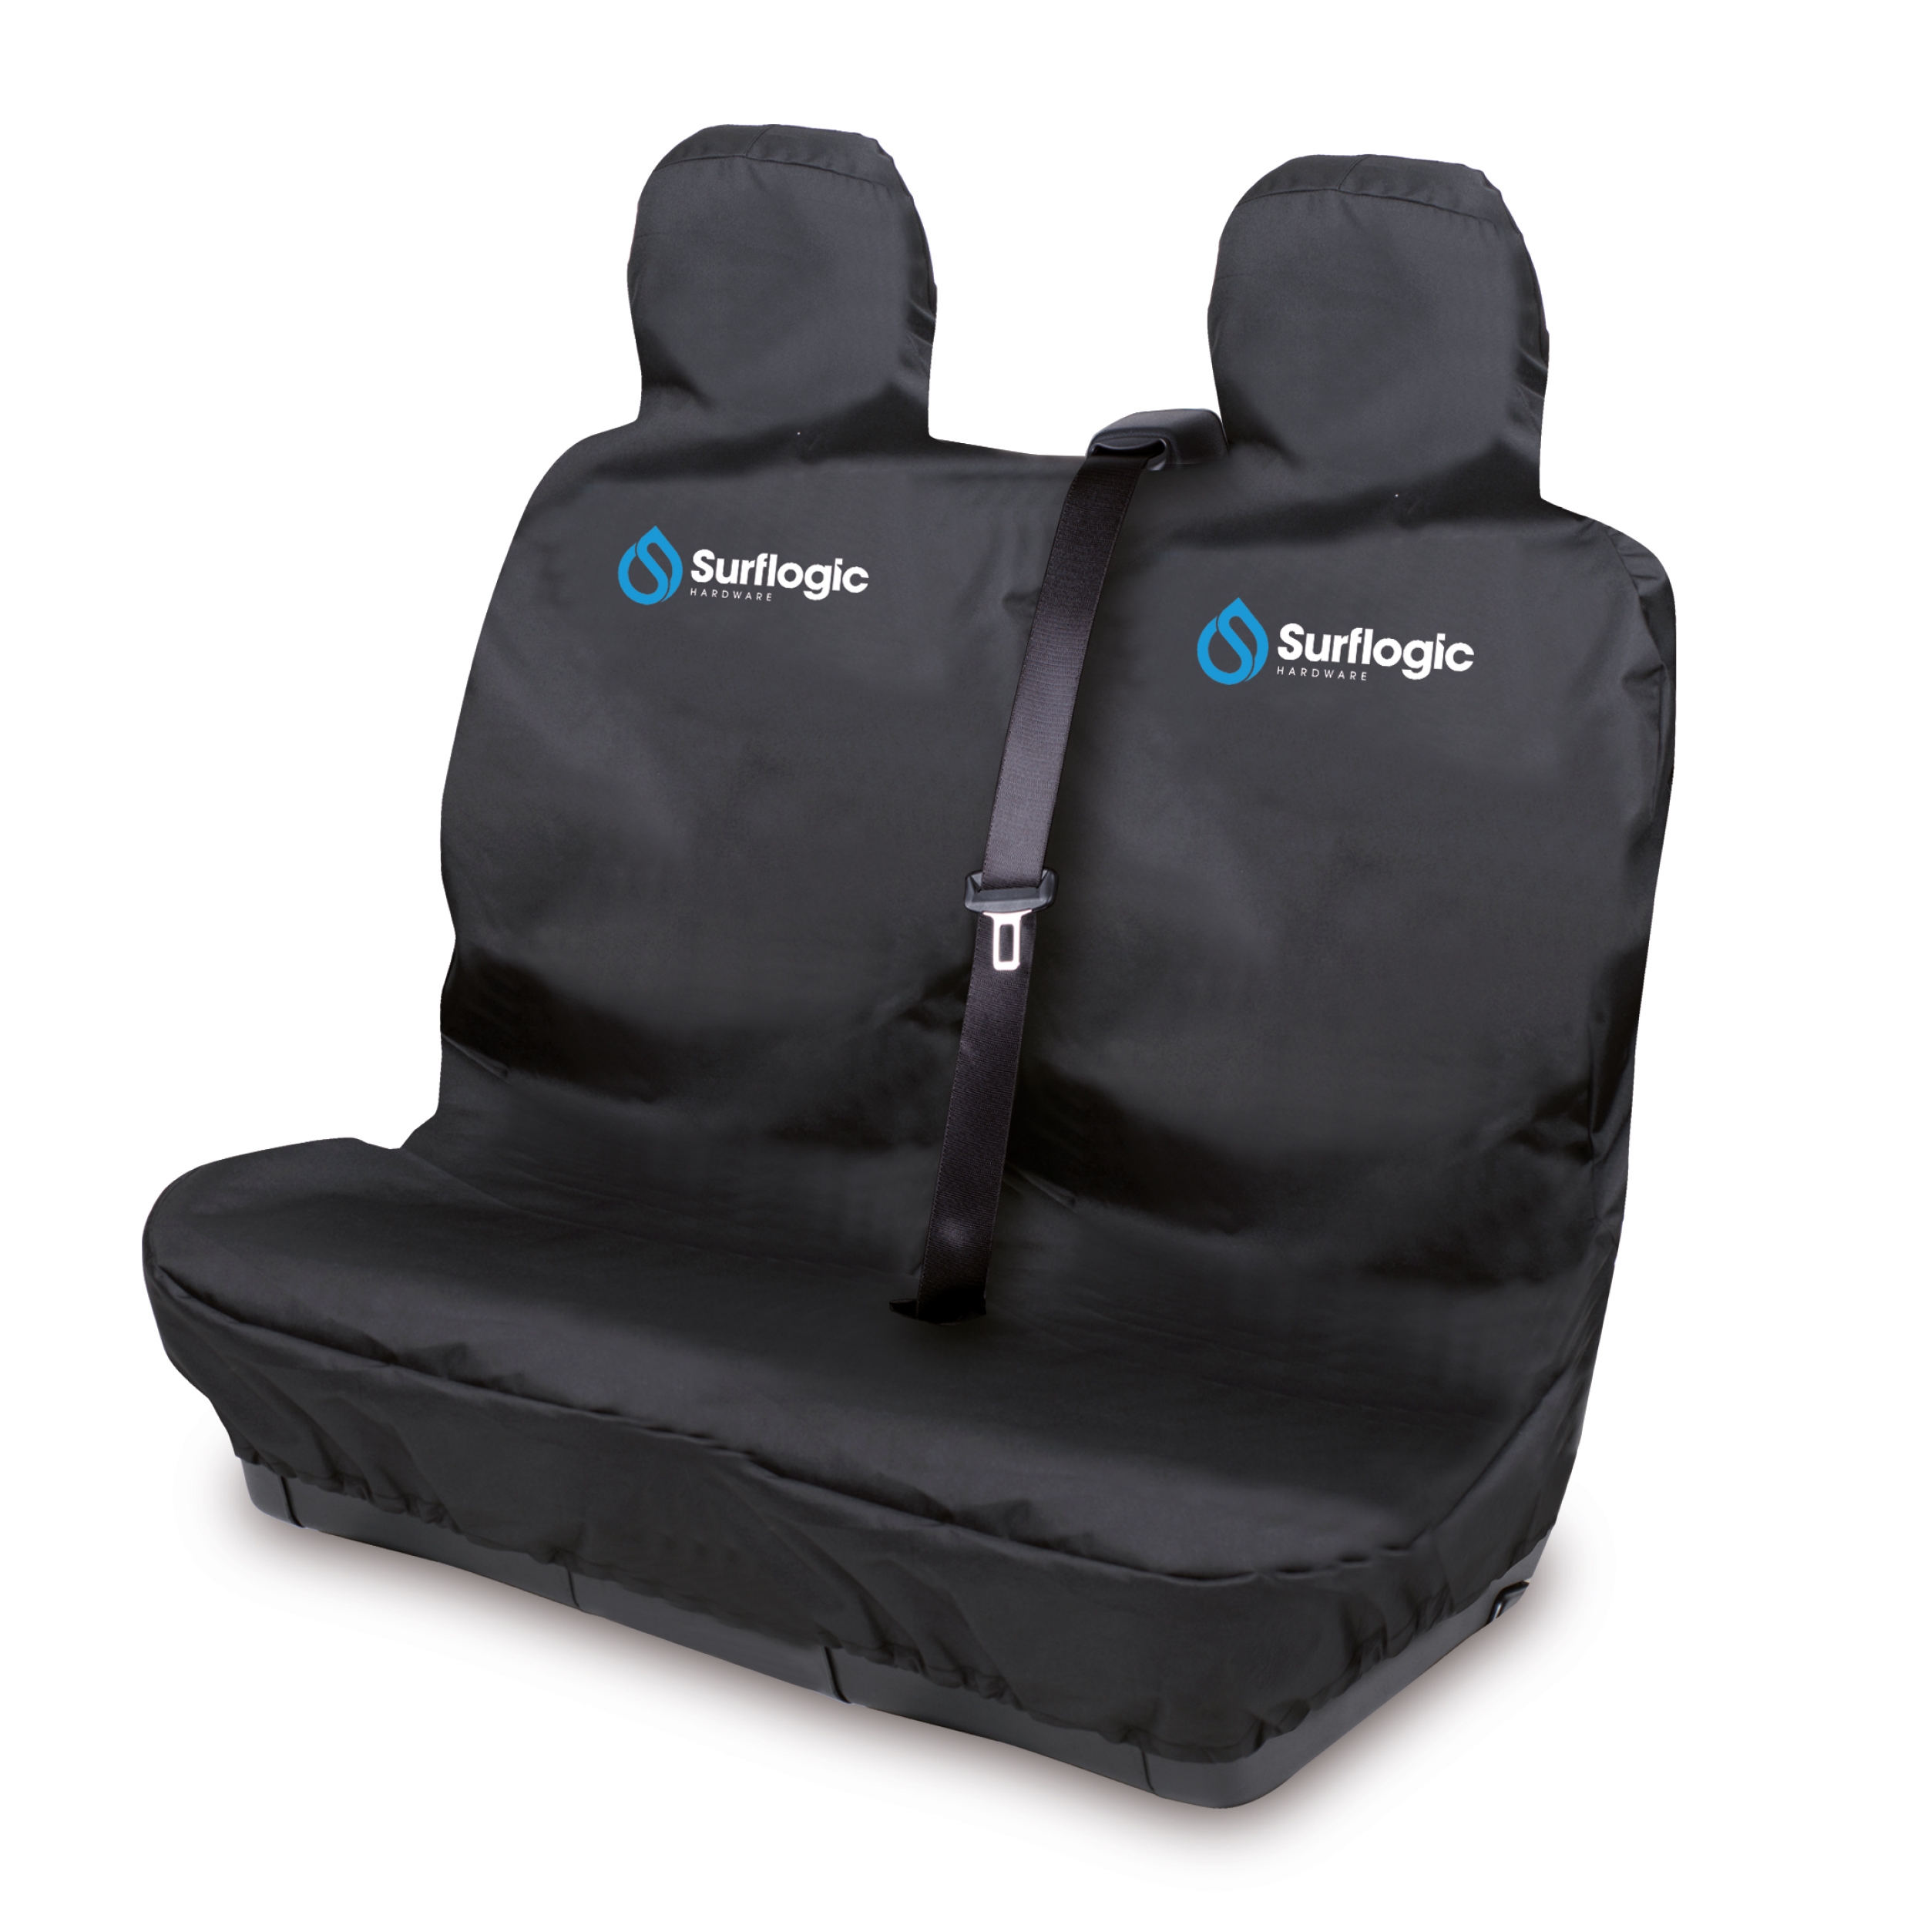 Surf Logic Waterproof Car Seat Cover Double – Black – The Foiling Collective